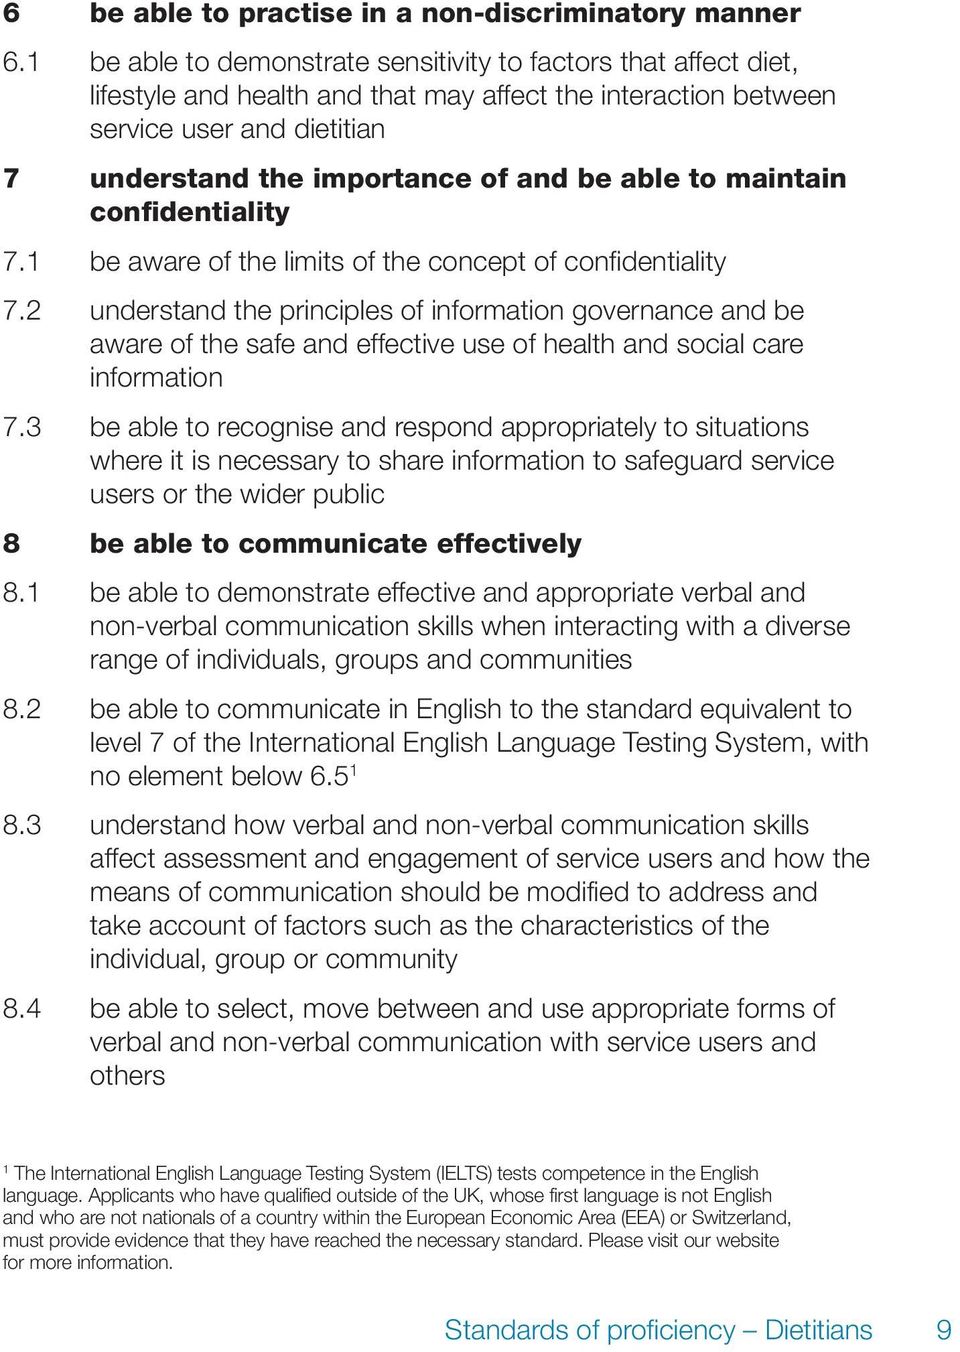 able to maintain confidentiality 7.1 be aware of the limits of the concept of confidentiality 7.